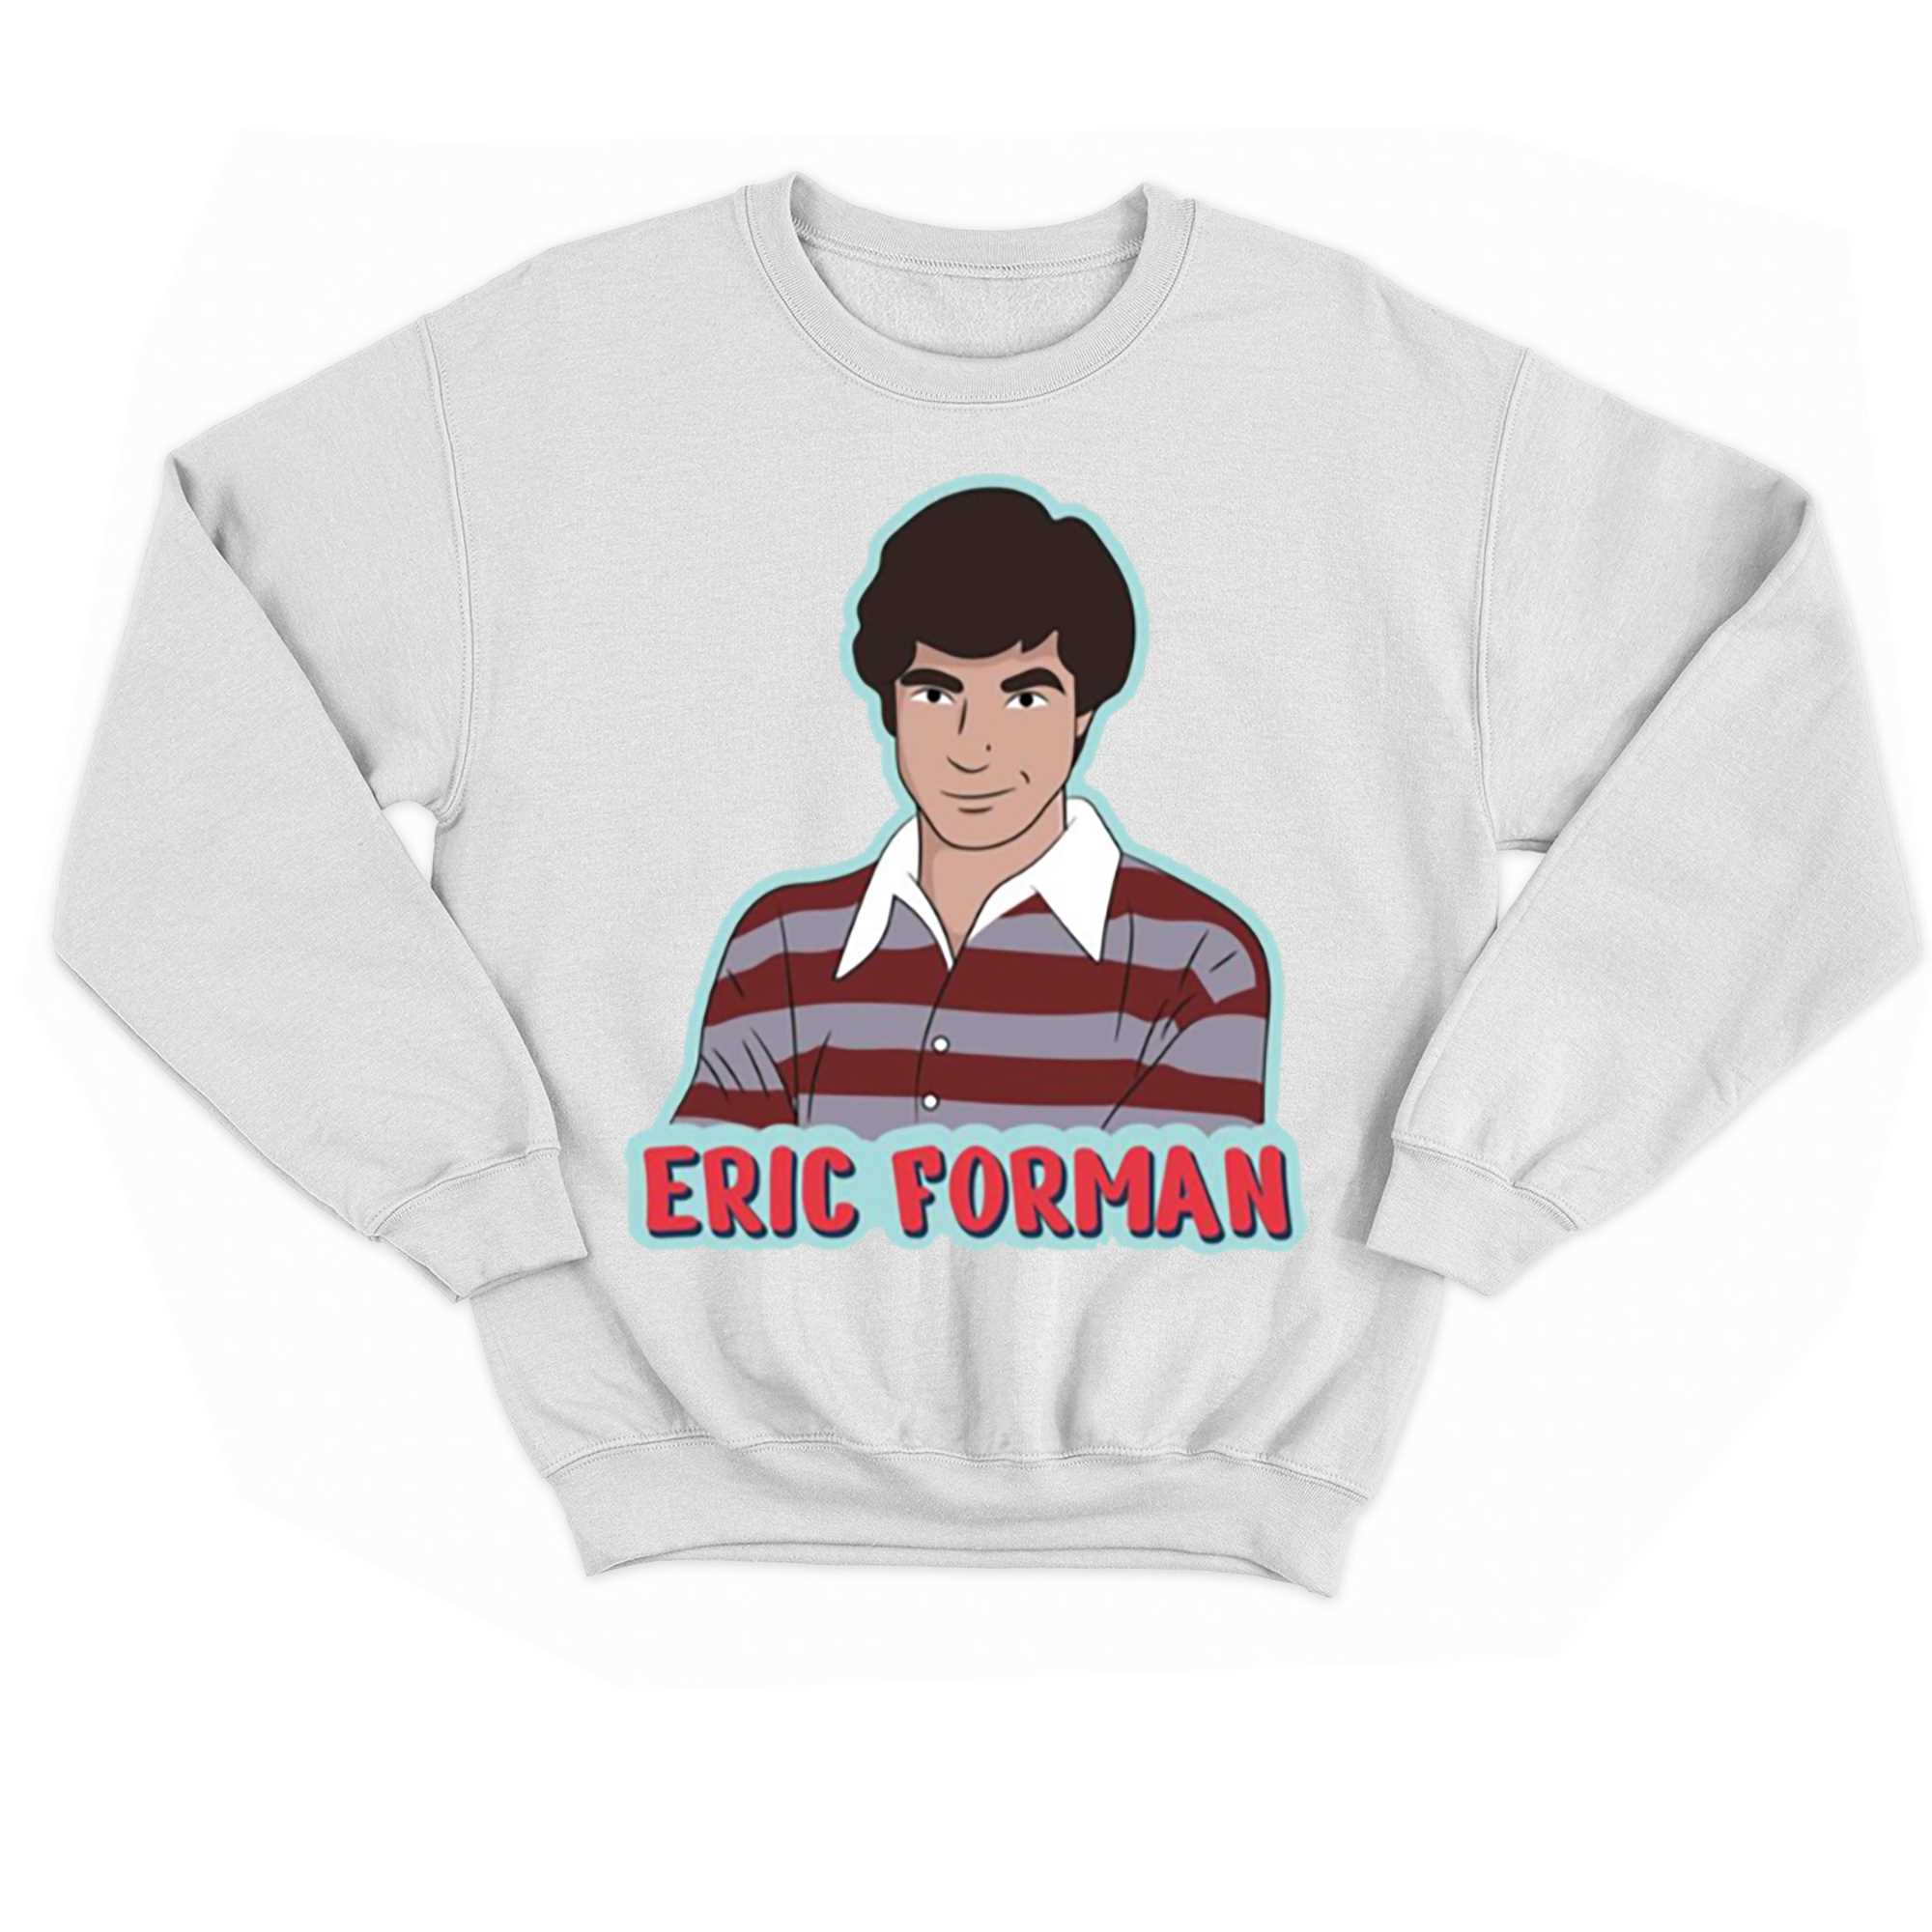 Eric Forman From That 70s Show Shirt 